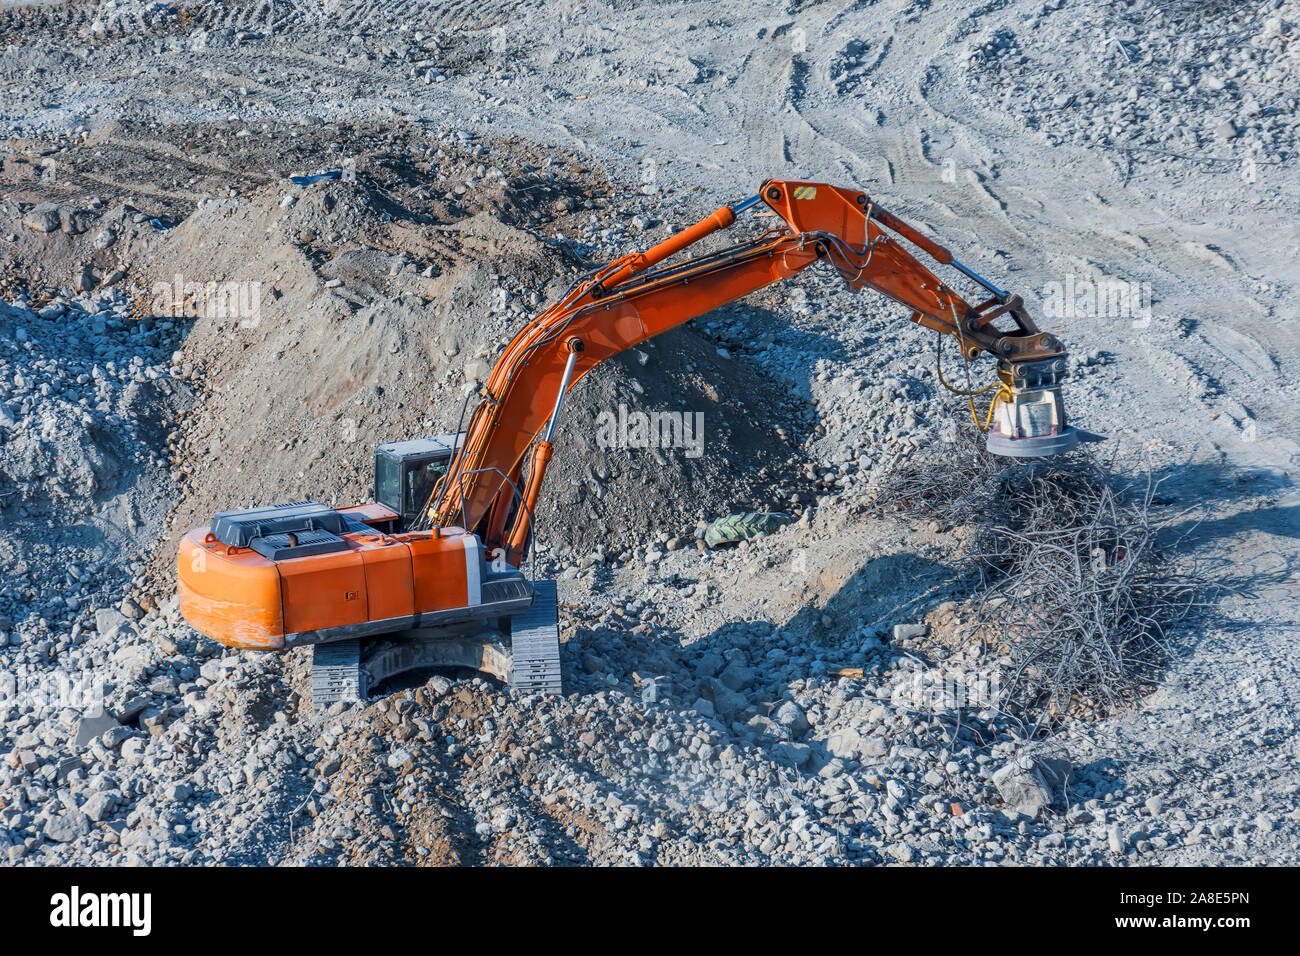 Excavator with a magnet on the boom for loading metal waste cargo Stock Photo